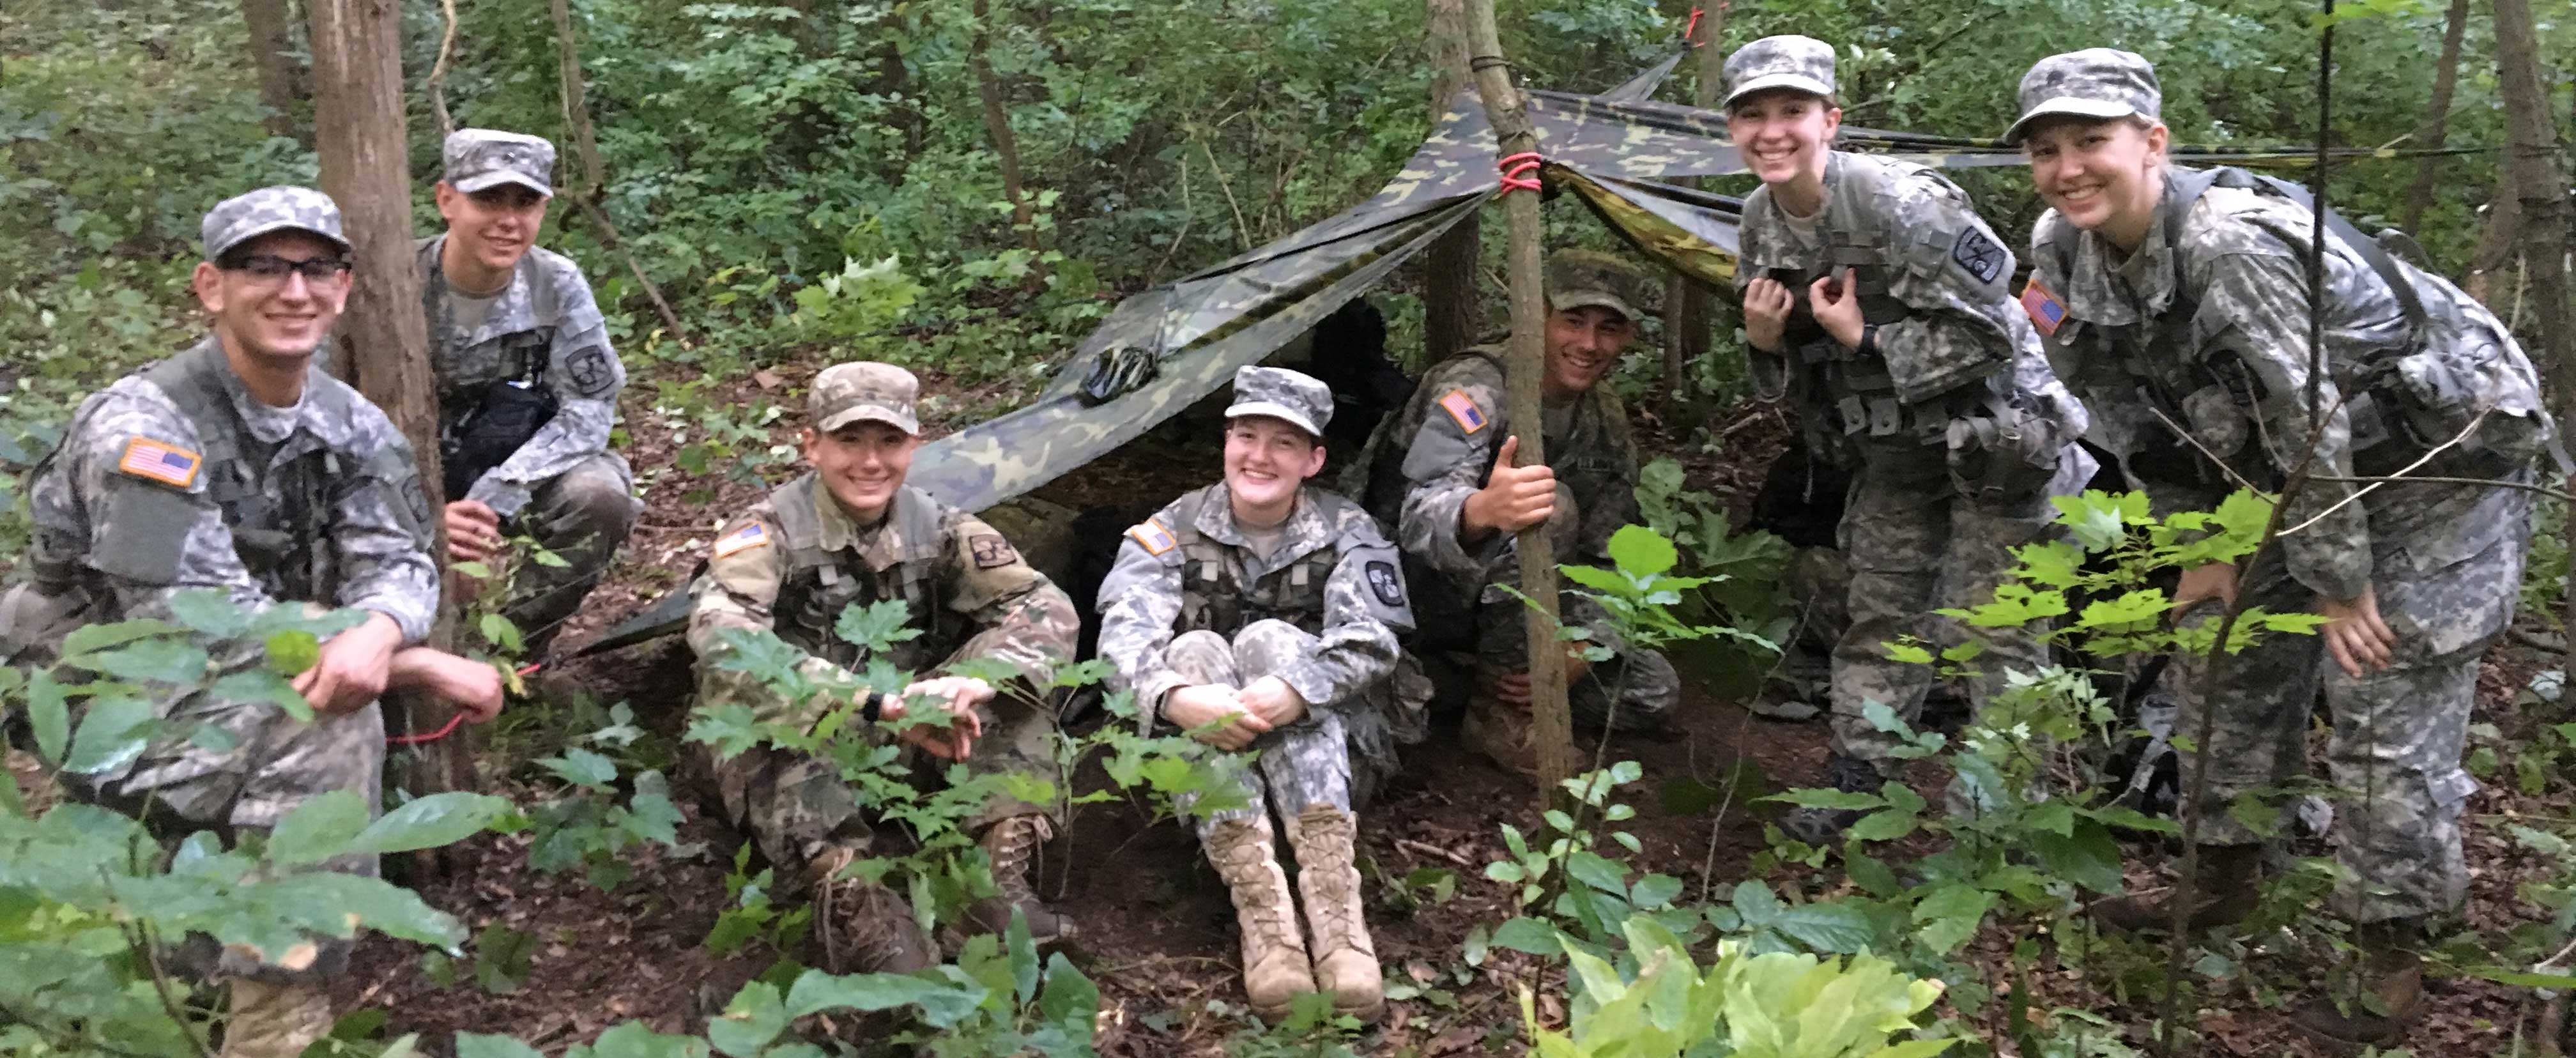 Group of cadets smiling together after setting up a tent in the woods during New Cadet Orientation